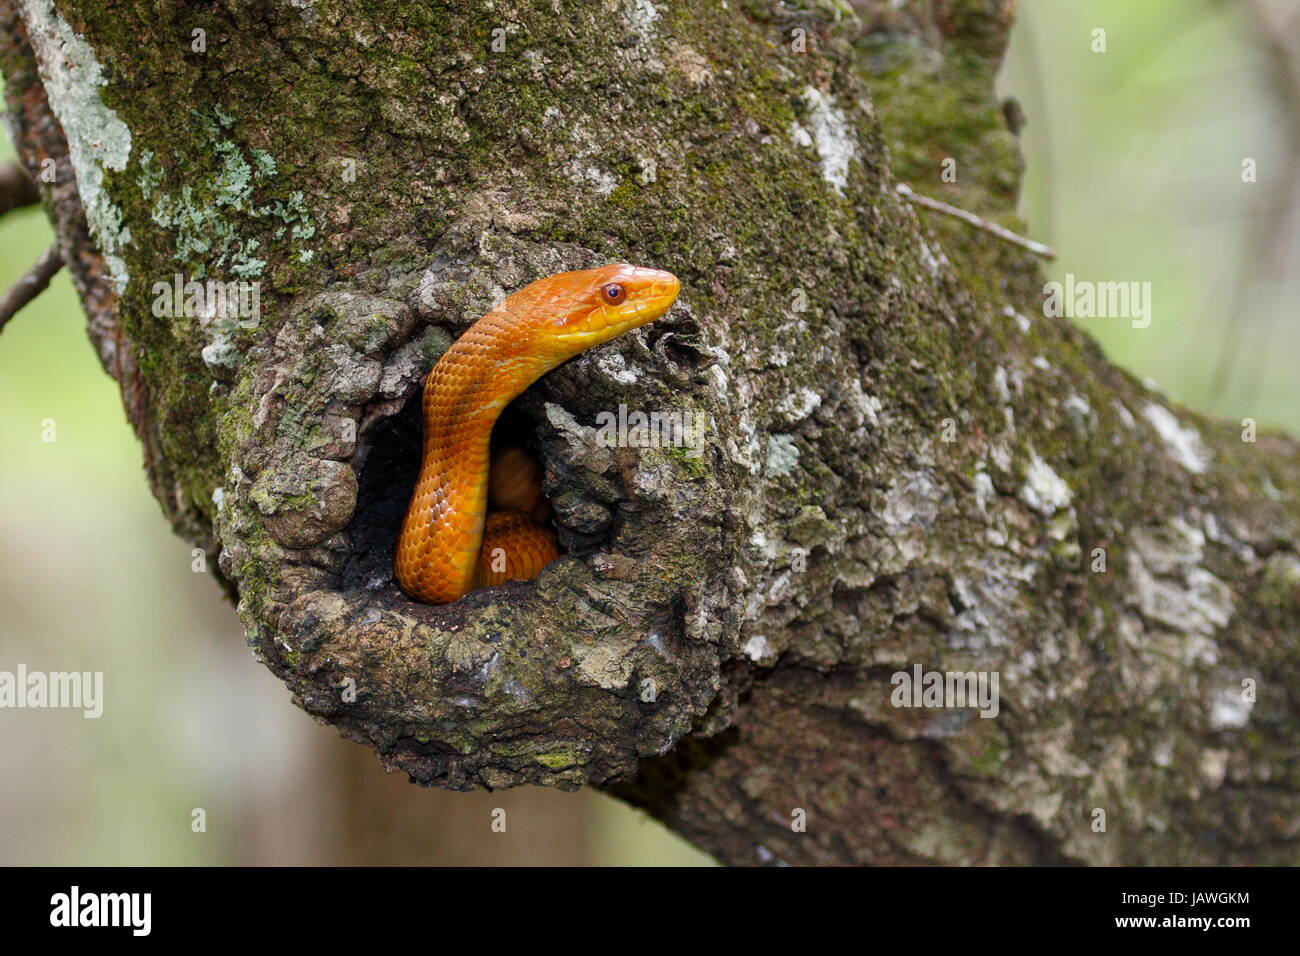 A yellow rat snake, Pantherophis obsoleta quadrivittata, holed up in a live oak tree. Stock Photo